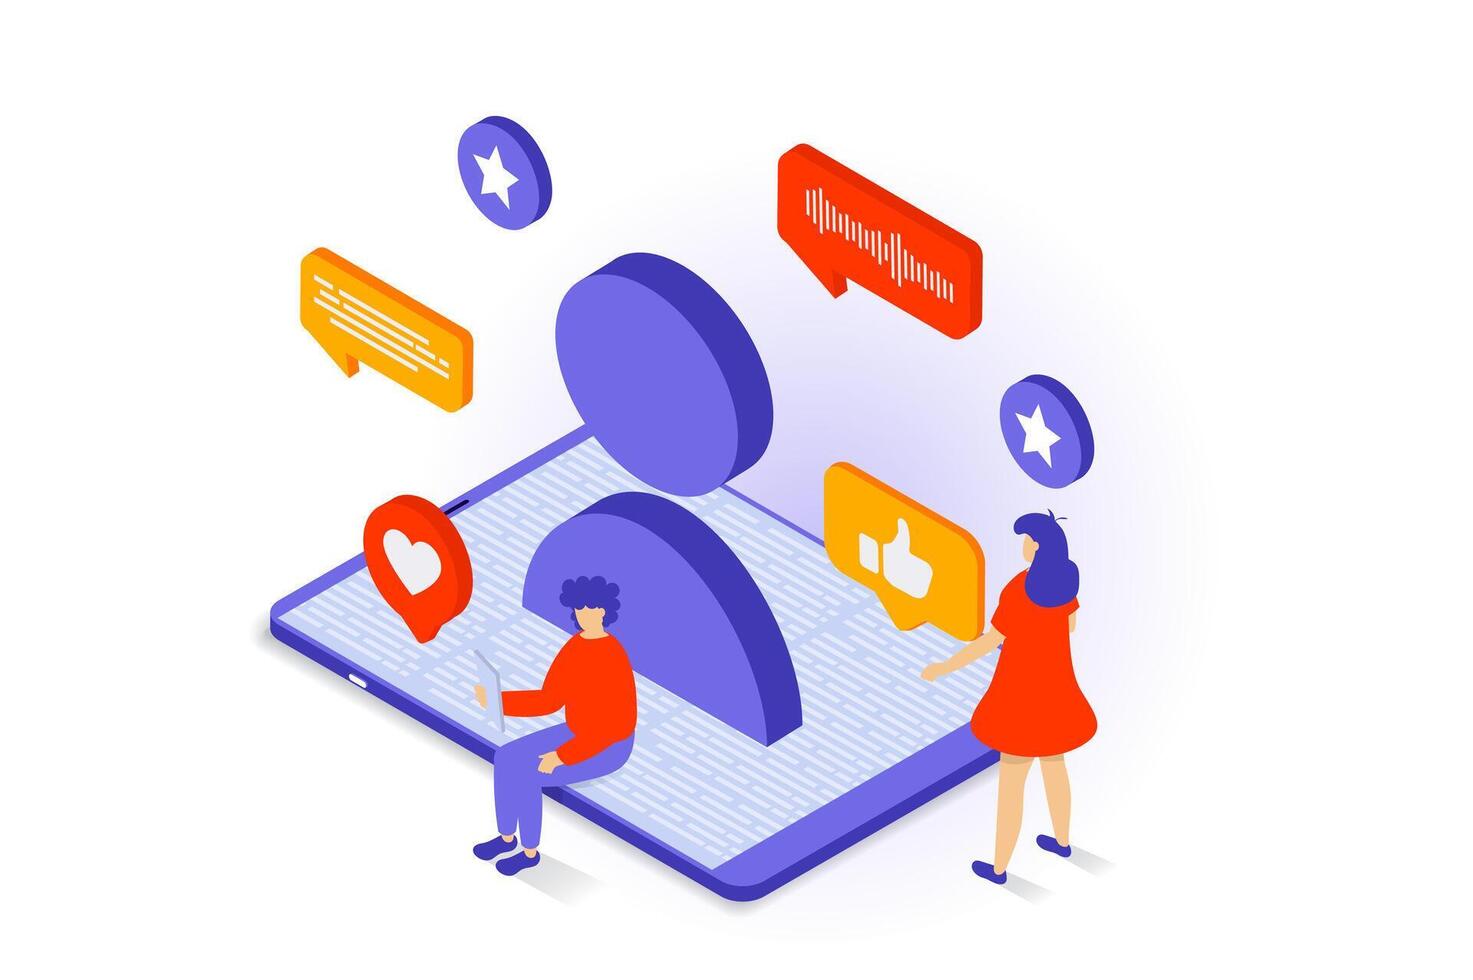 Social media concept in 3d isometric design. People networking, registarate and manage new online profile, chatting and likes friends posts. Vector illustration with isometry scene for web graphic